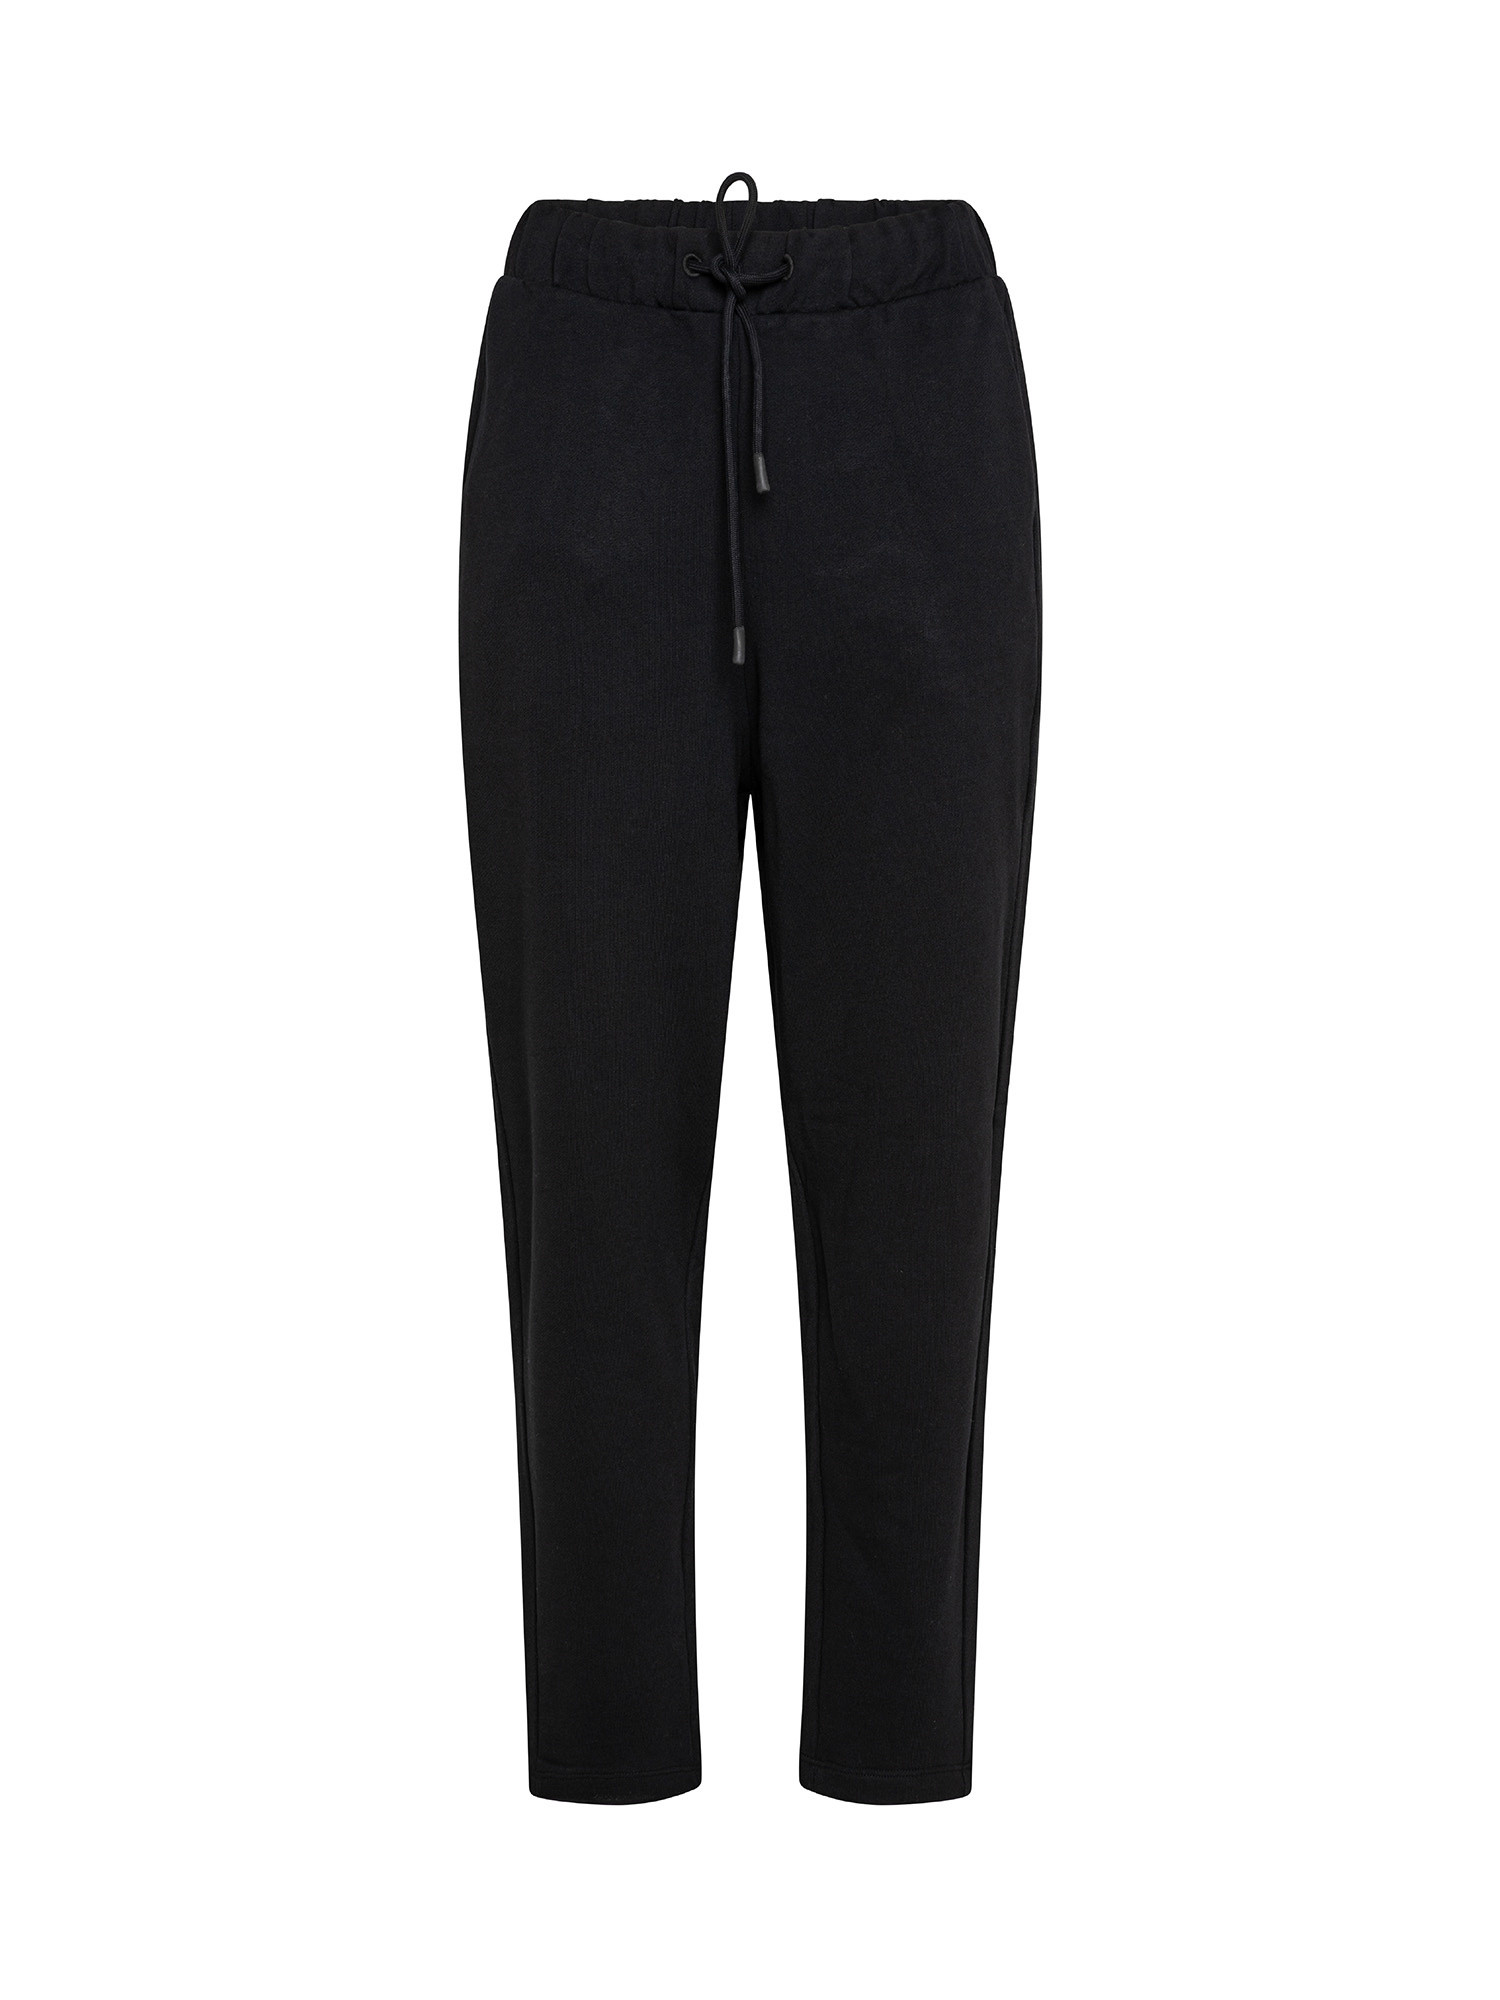 Ecoalf - Mills trousers with elasticated waist, Black, large image number 0